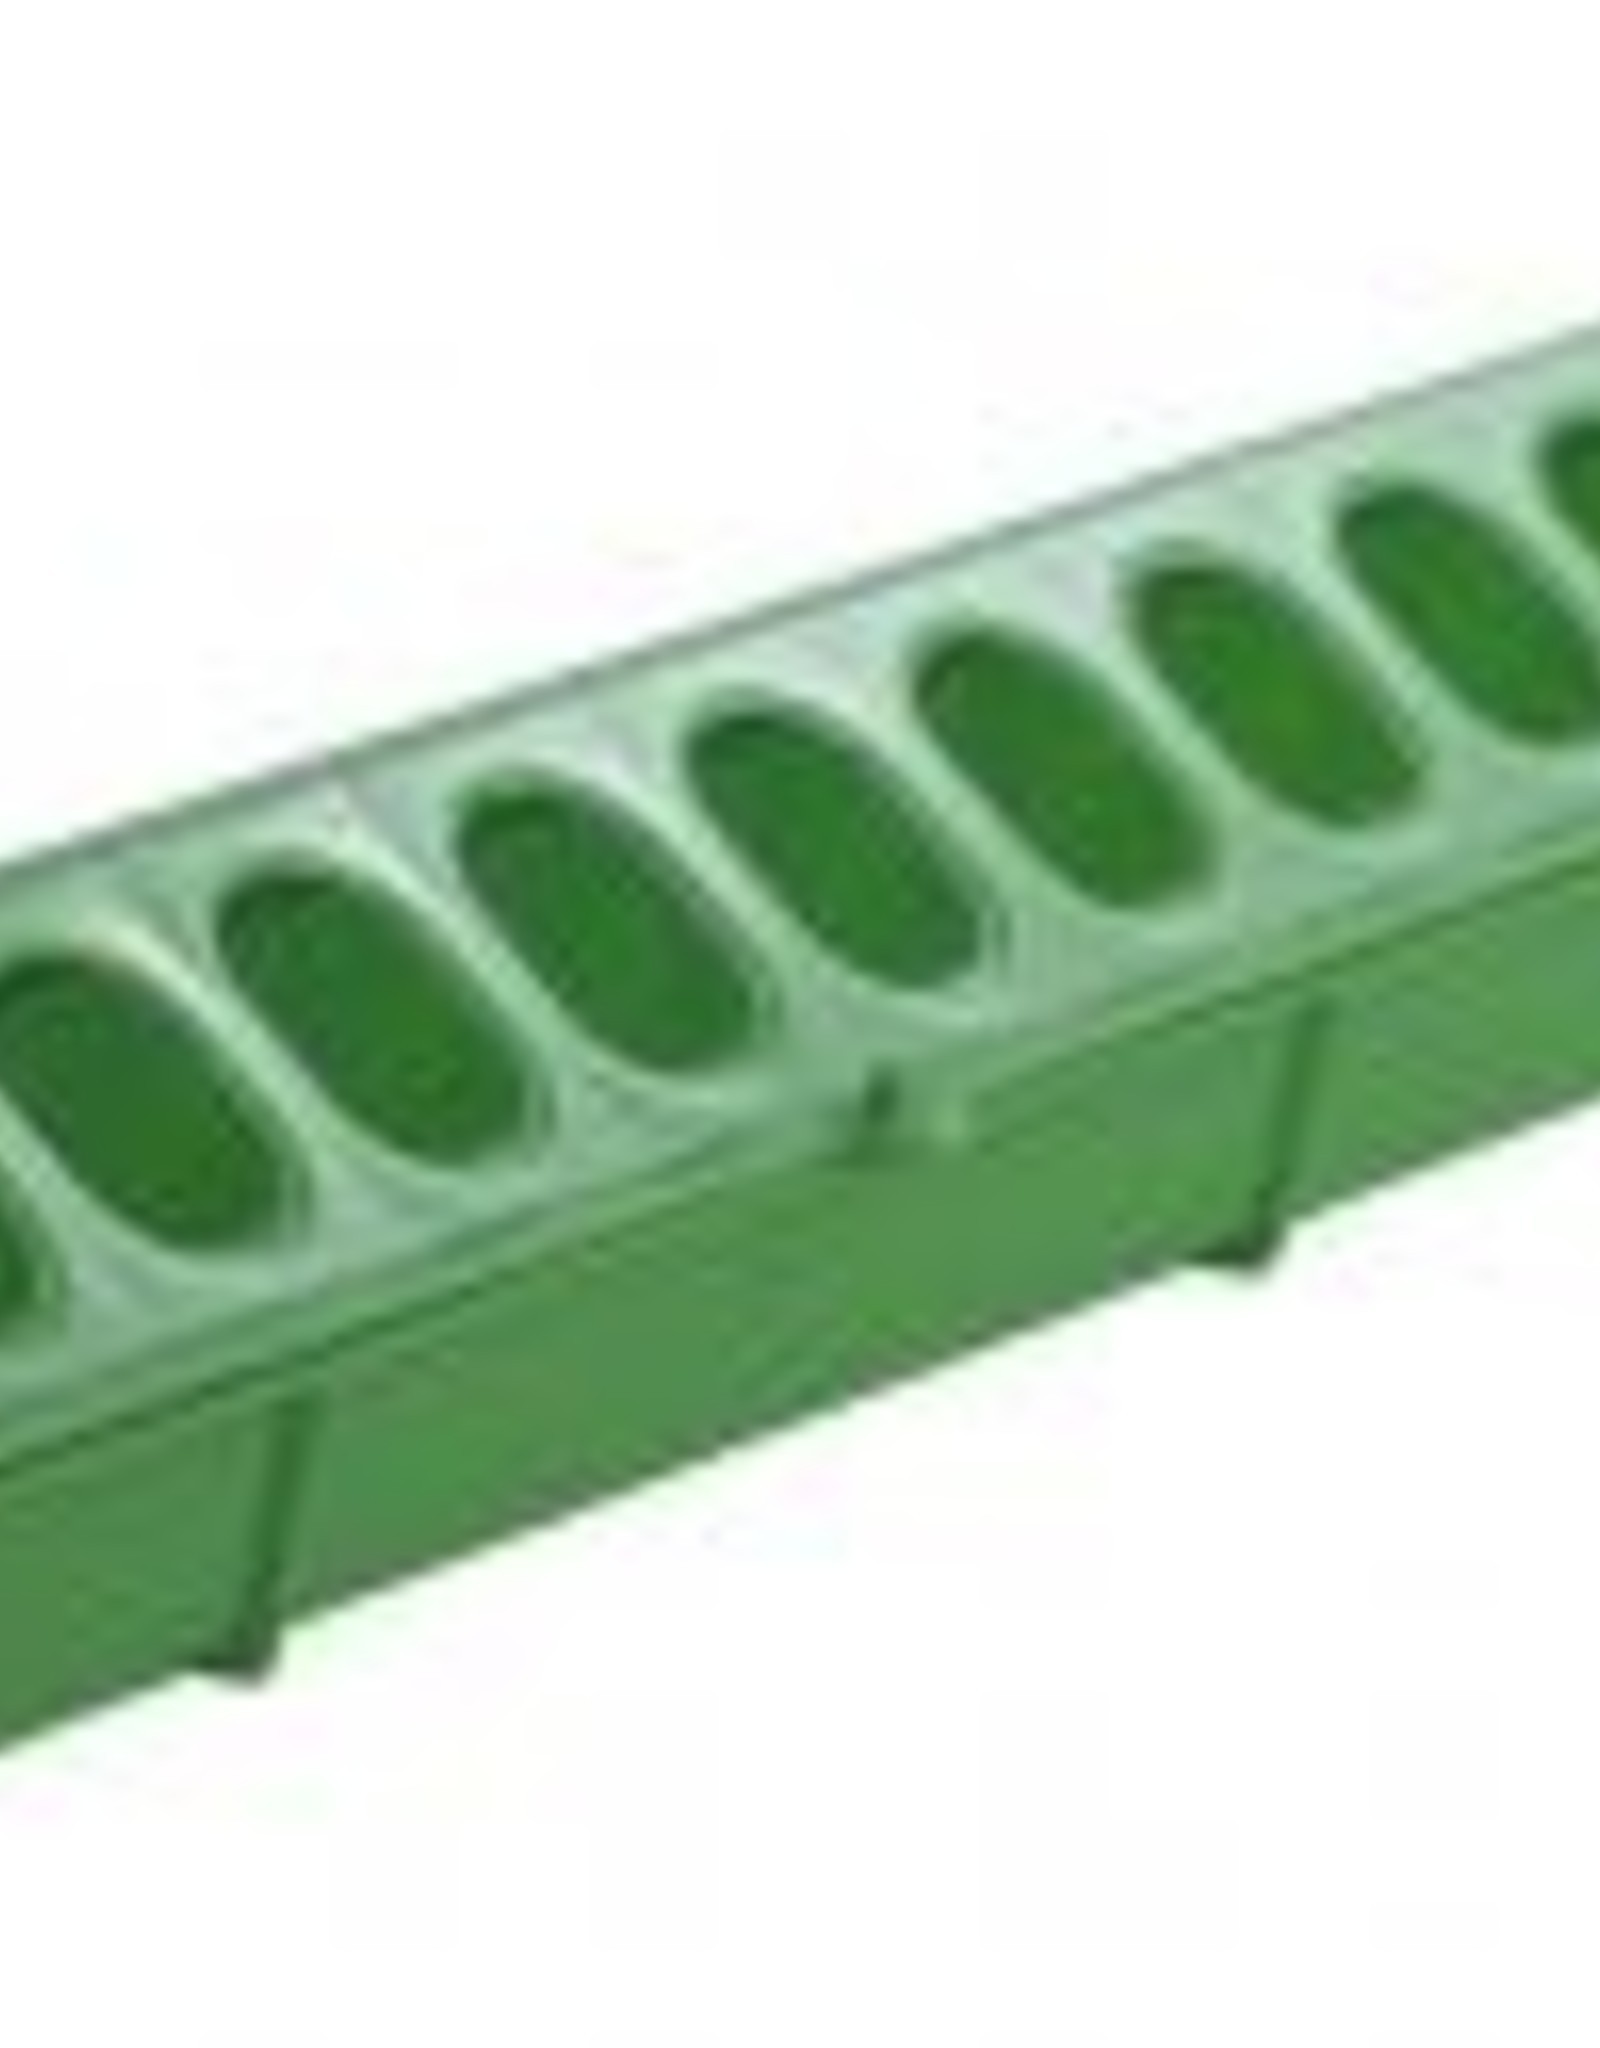 MILLER MANUFACTURING FLIP-TOP POULTRY FEEDER GREEN 20IN